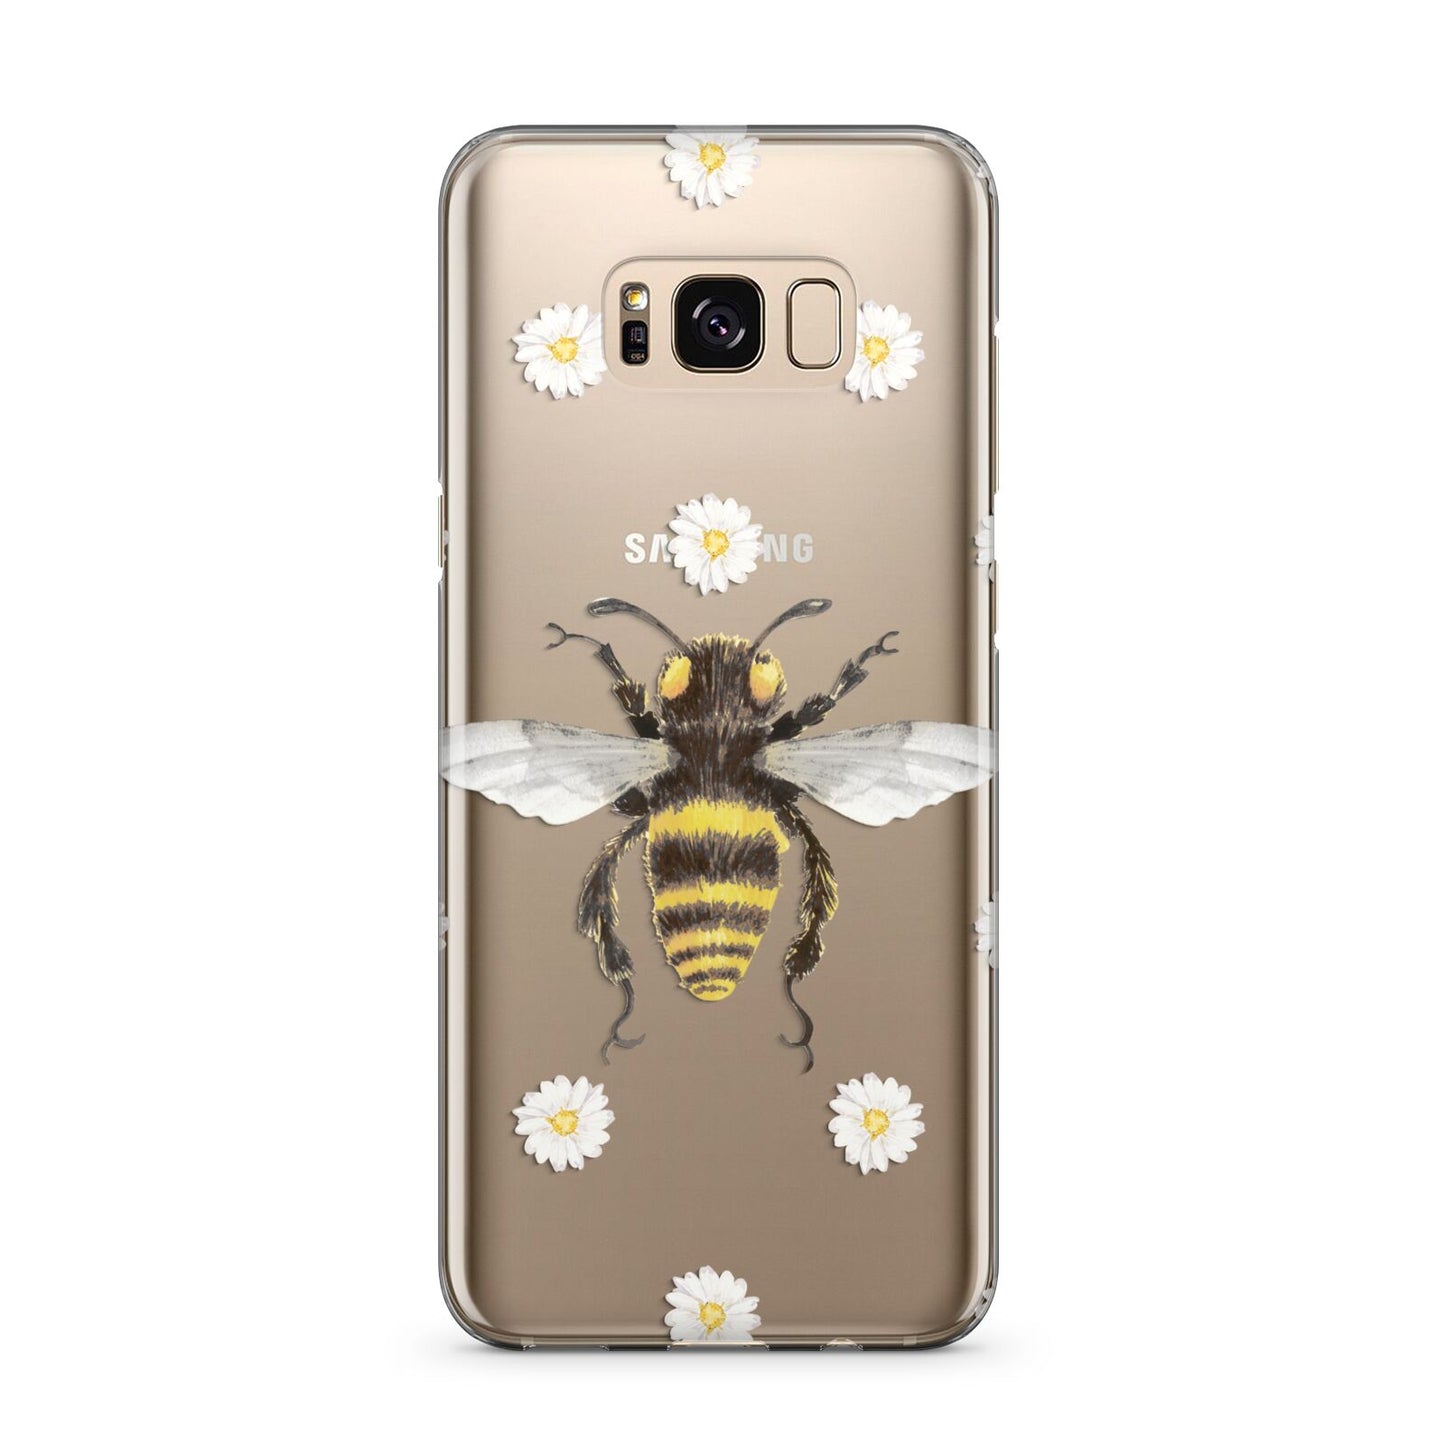 Bee Illustration with Daisies Samsung Galaxy S8 Plus Case